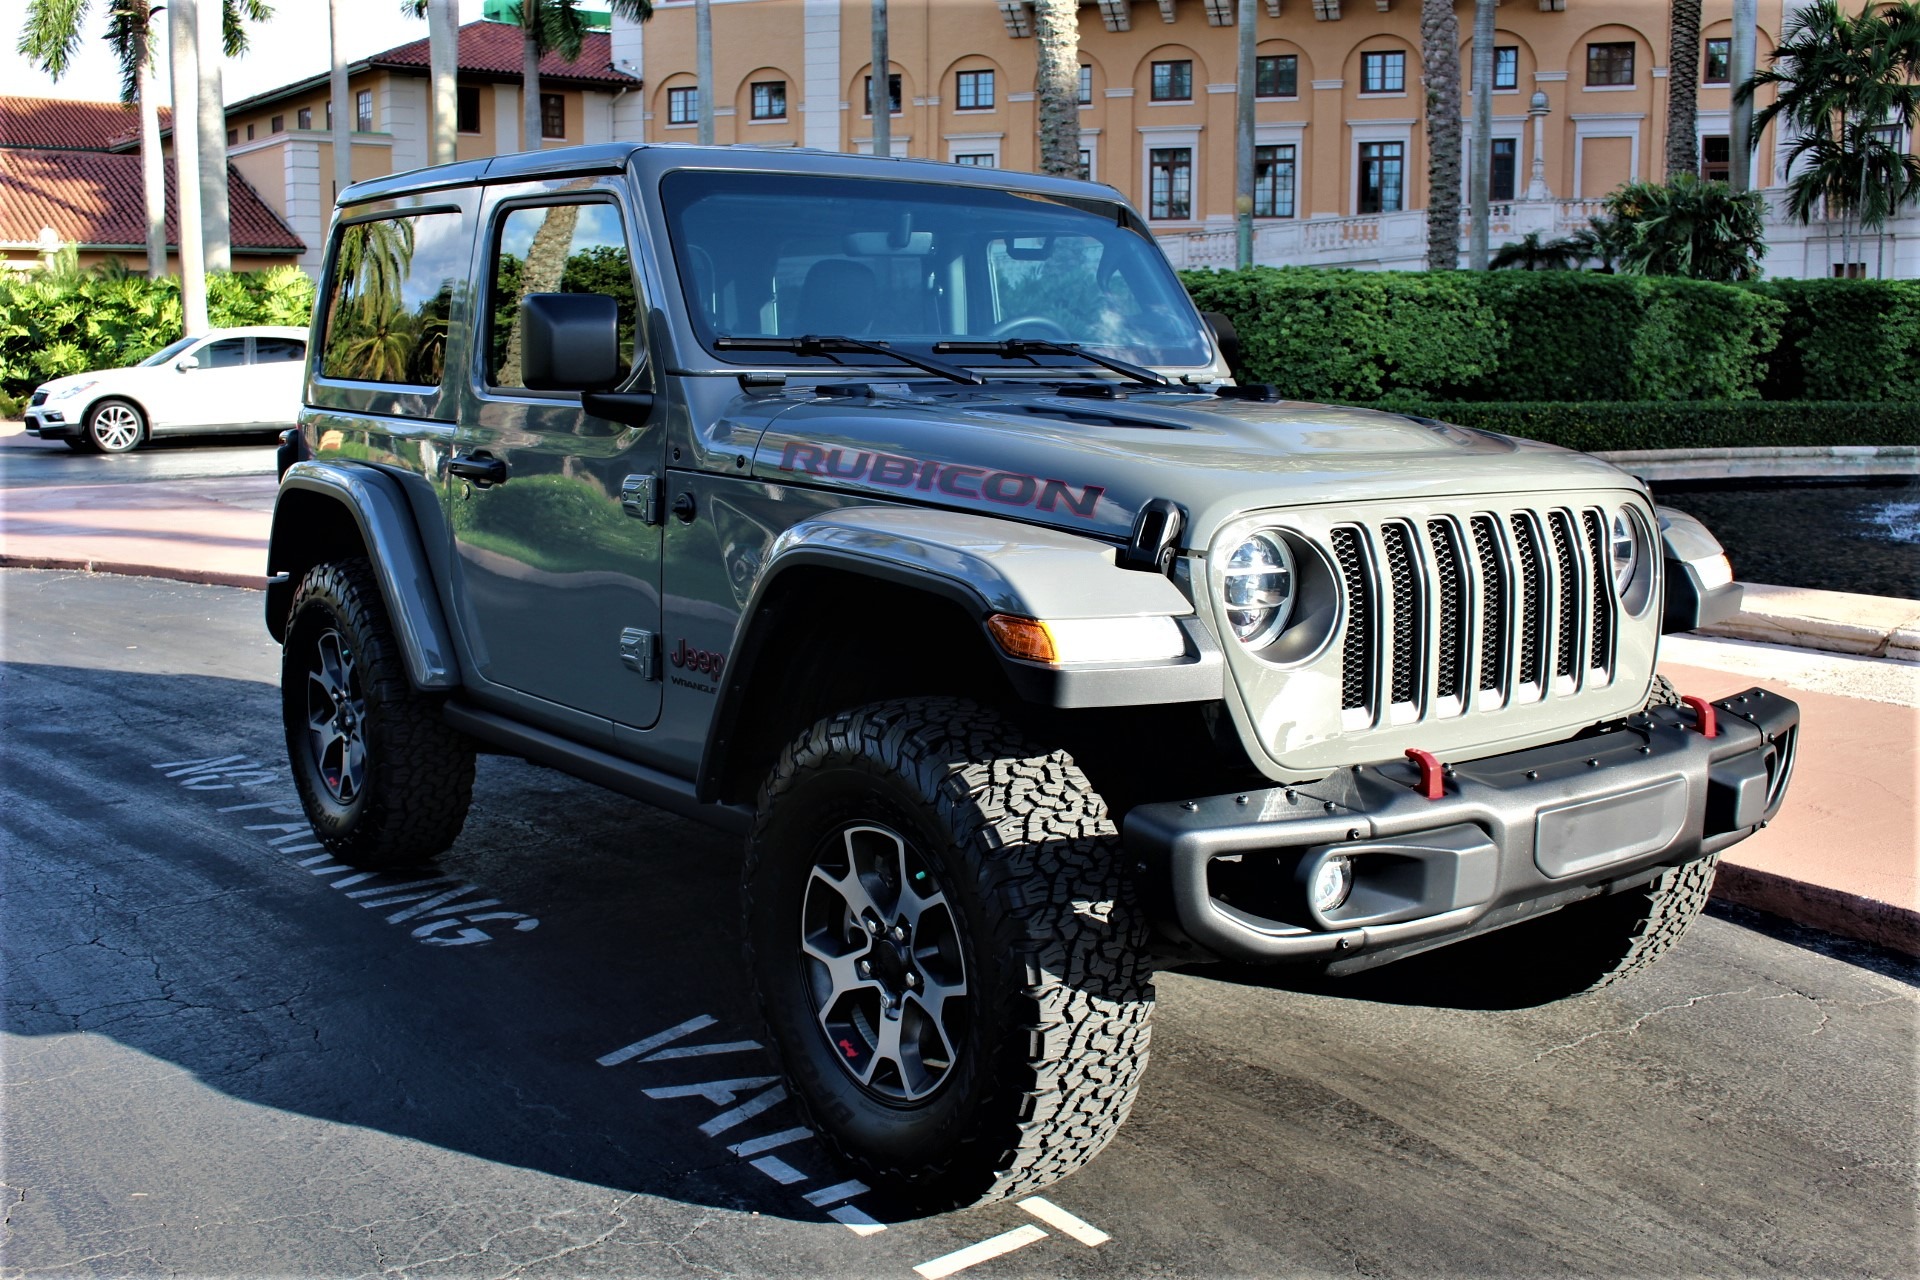 Used 2018 Jeep Wrangler Rubicon for sale Sold at The Gables Sports Cars in Miami FL 33146 2